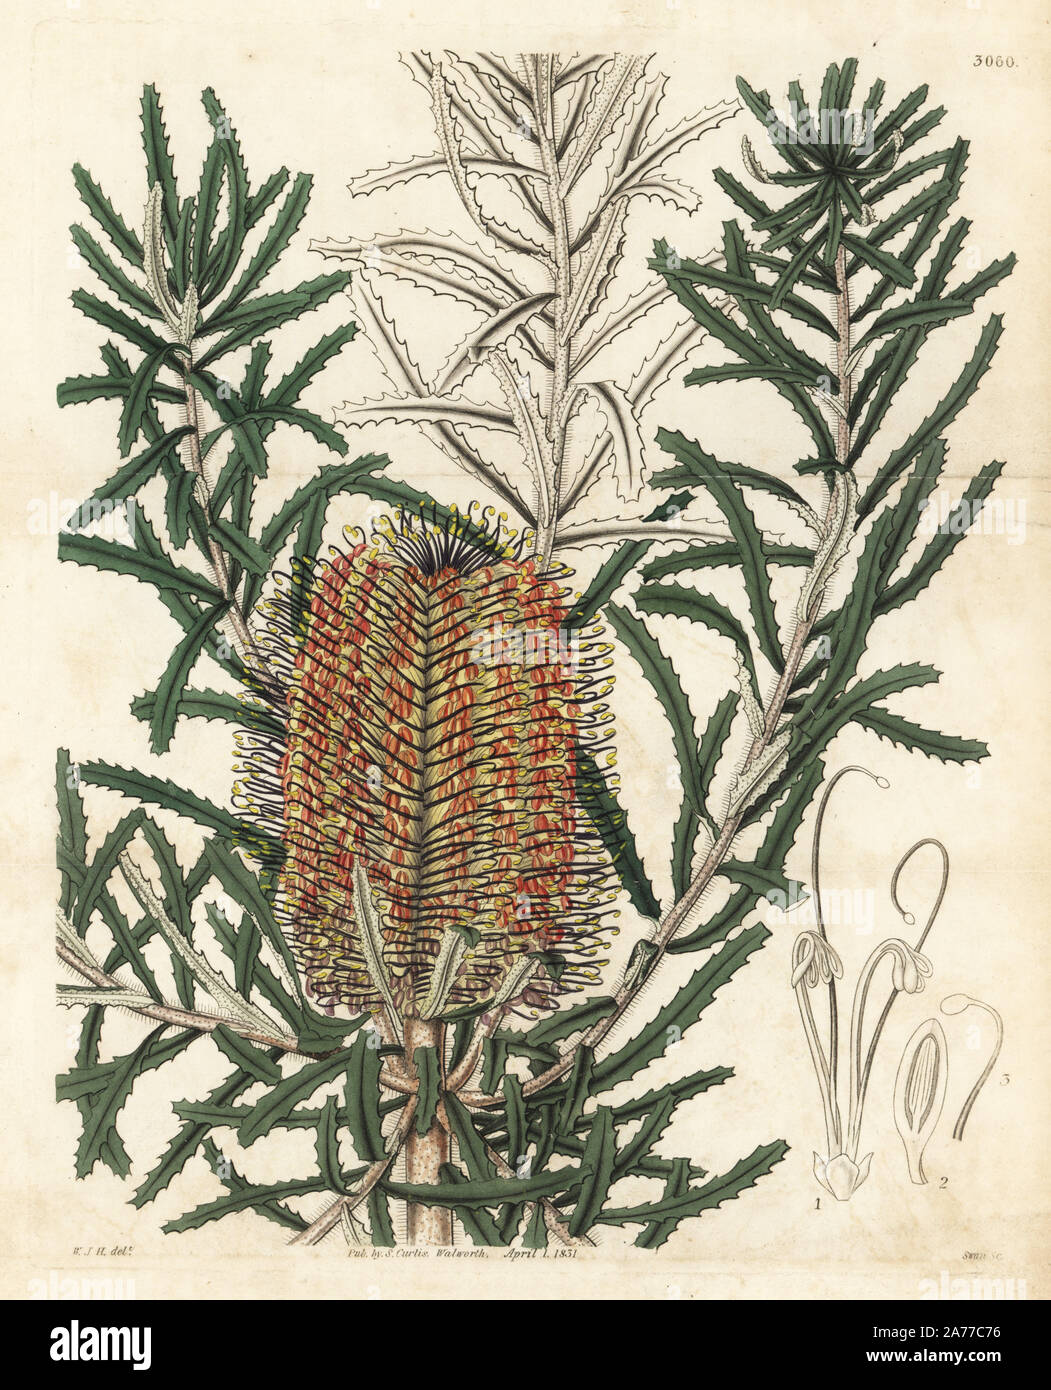 Banksia spinulosa var. cunninghamii (Shore banksia, Banksia littoralis). Handcoloured copperplate engraving by Swan after an illustration by William Jackson Hooker from Samuel Curtis's 'Botanical Magazine,' London, 1831. Stock Photo